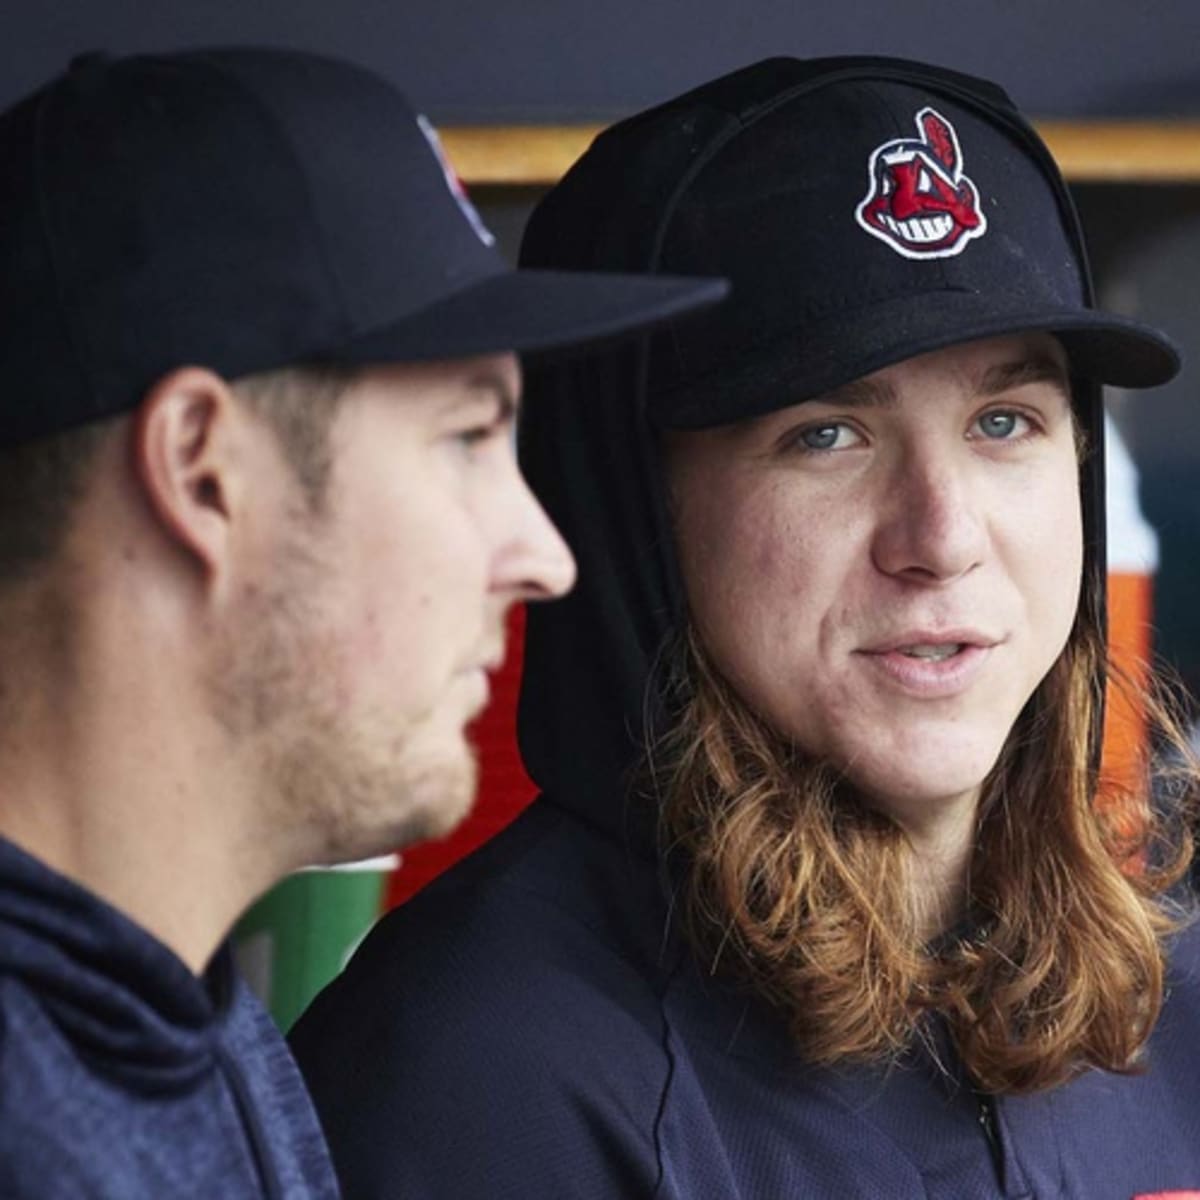 Mike Clevinger Takes a Massive Step Towards Regaining the Trust of